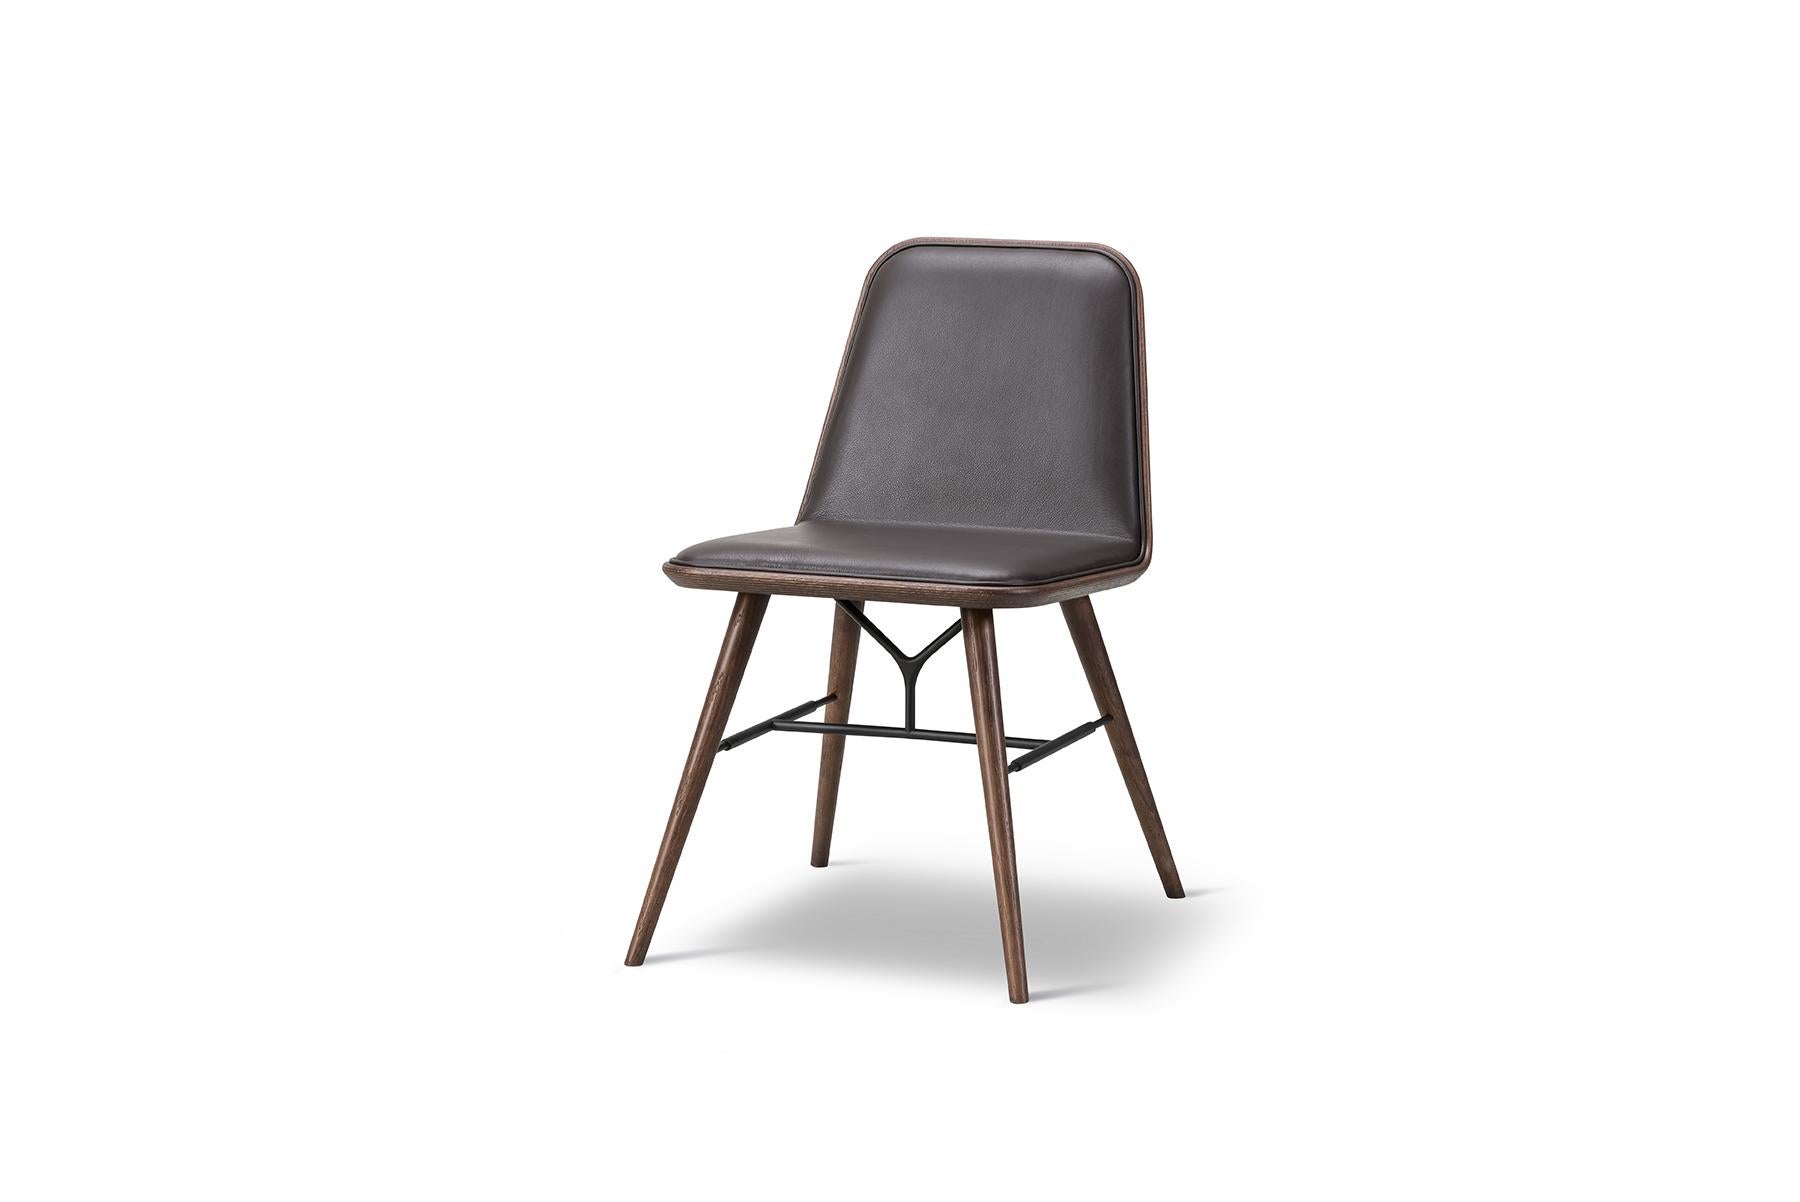 Space Copenhagen spine chair is the fusion of Fredericia’s craft traditions and Space Copenhagen’s dynamic visual language that uses both classic motifs and unorthodox details. Designed as a luxurious dining chair for both public space use and